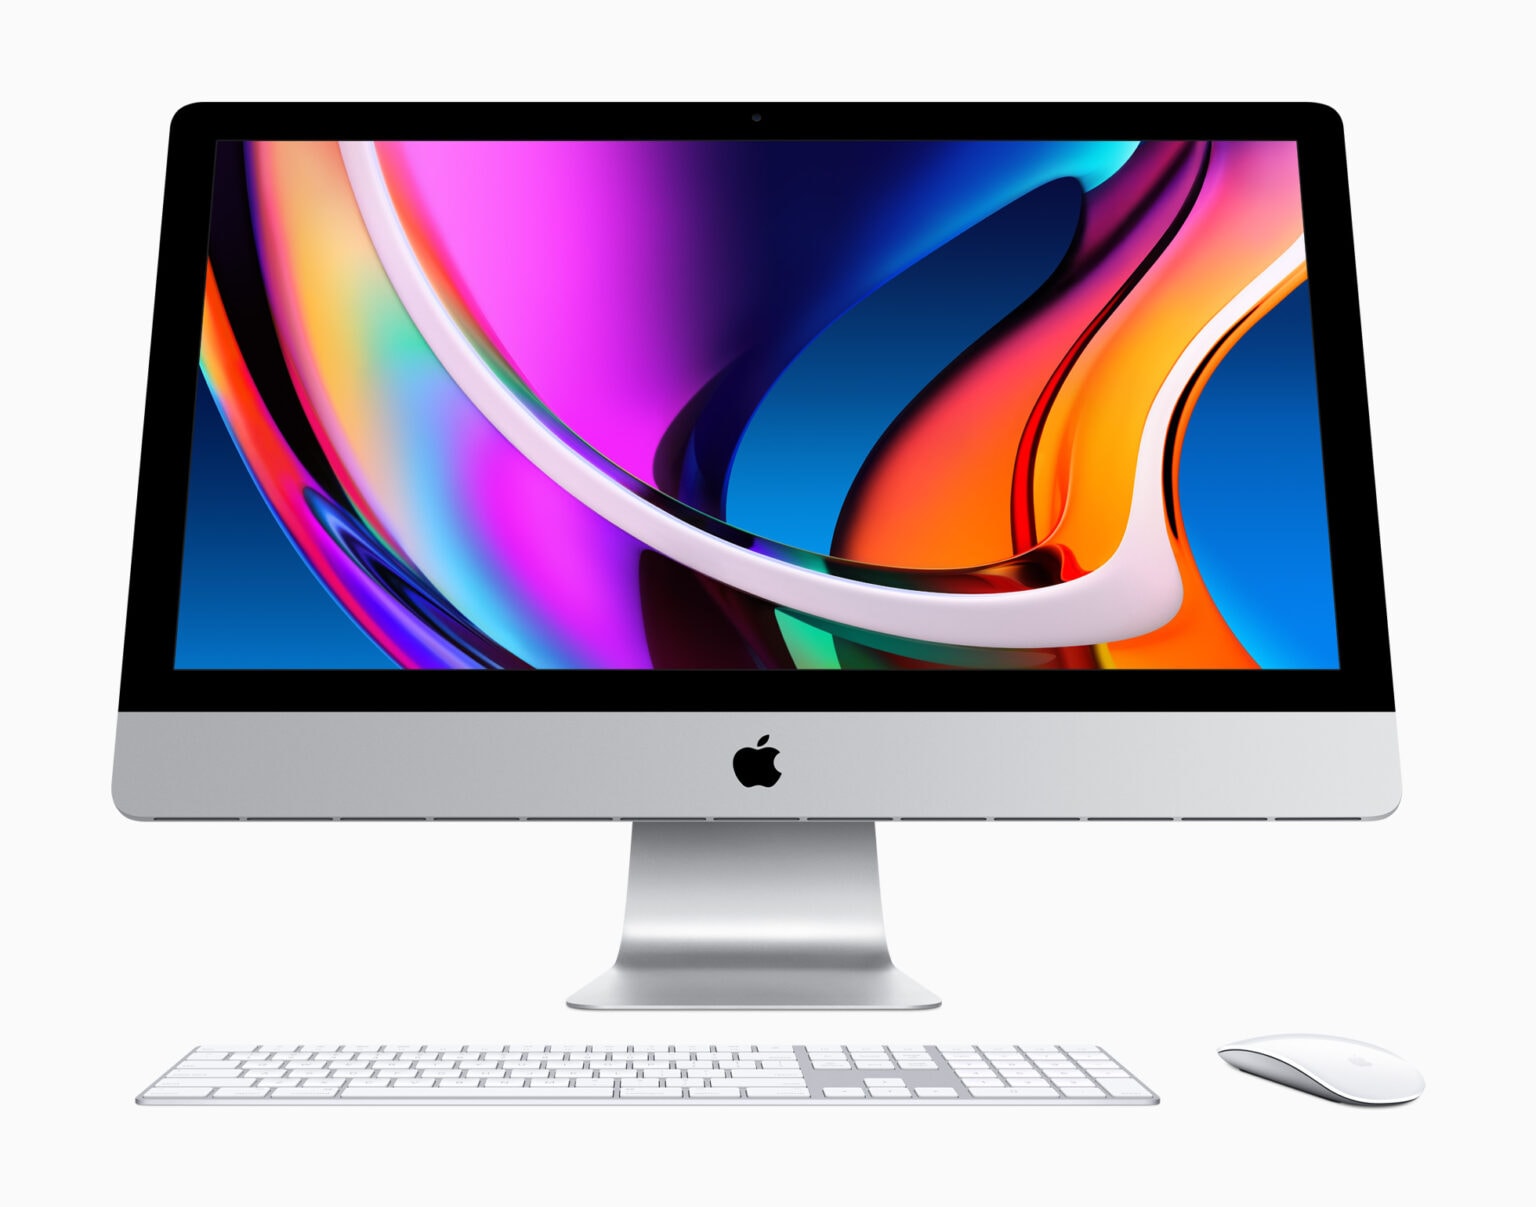 2020 iMac: The new iMac looks just like the old one (only faster).